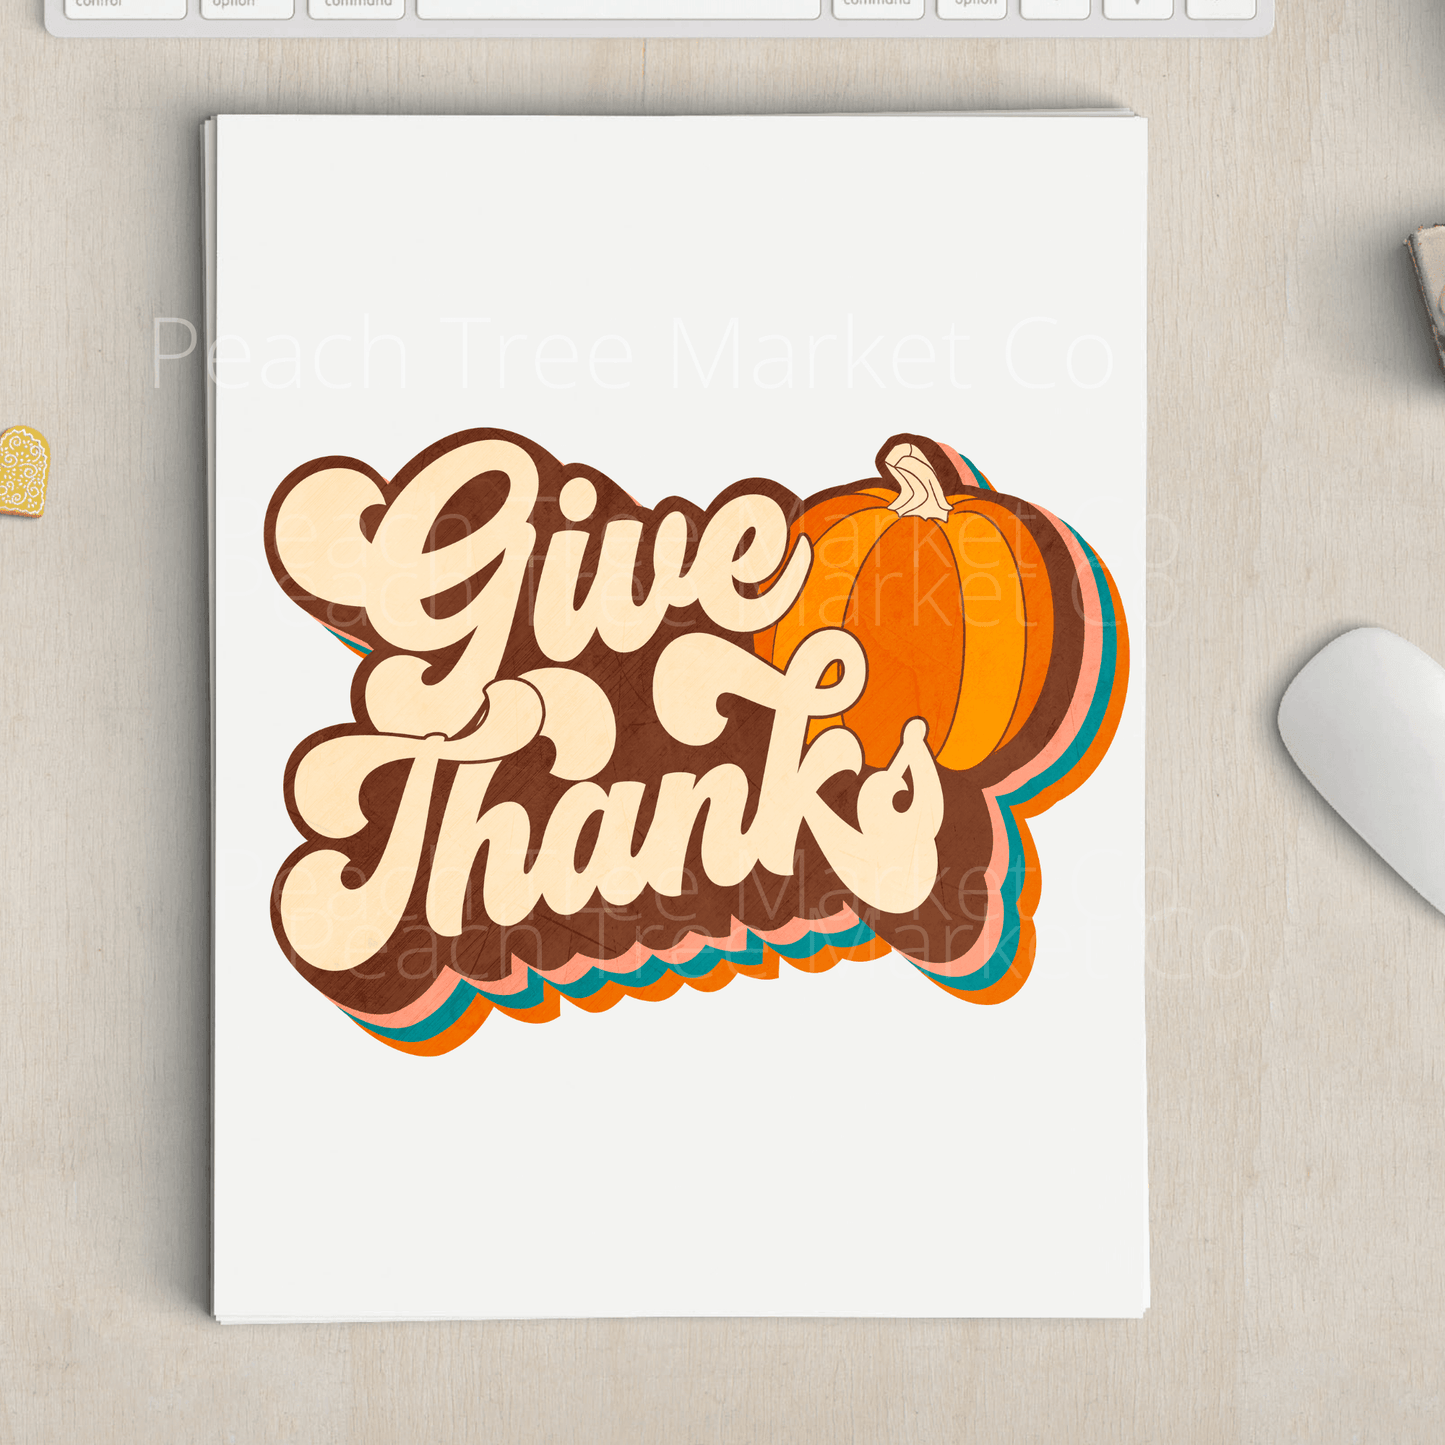 Give Thanks Sublimation Transfer